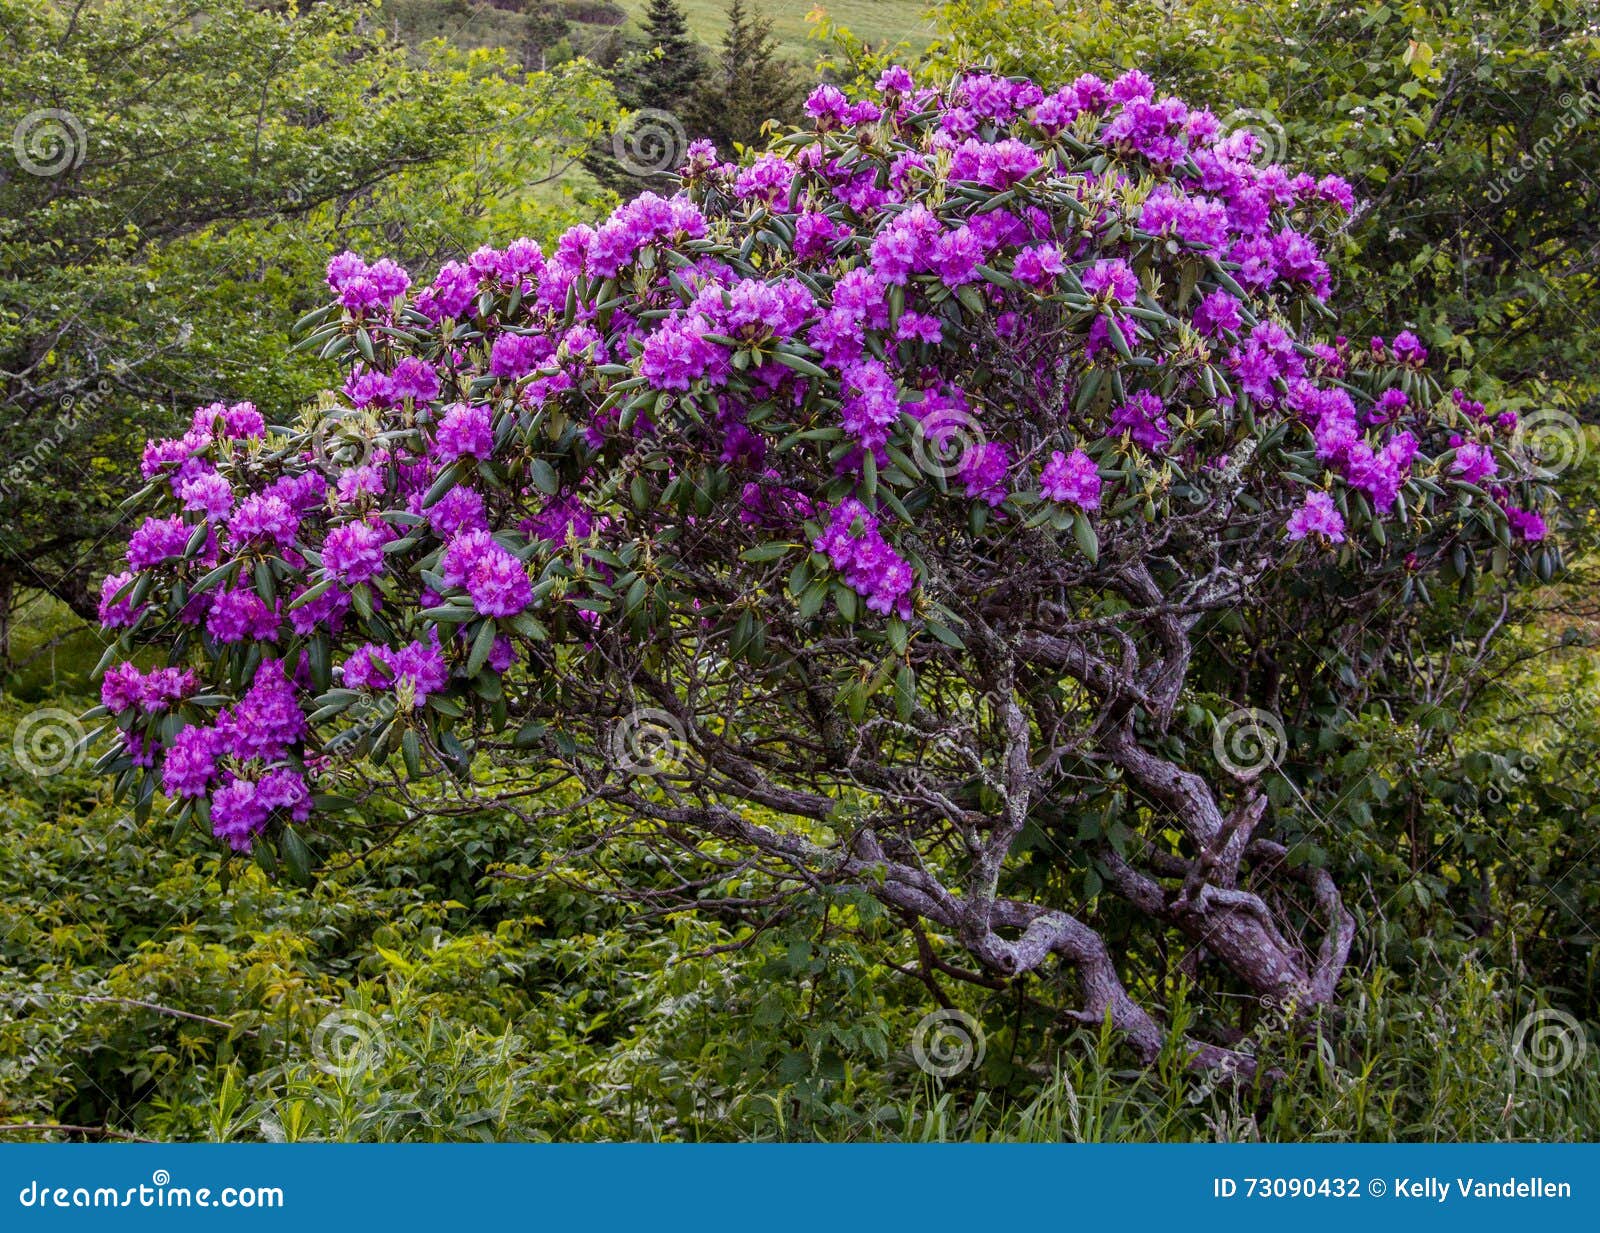 gnarly rhododendron bush covered in blooms